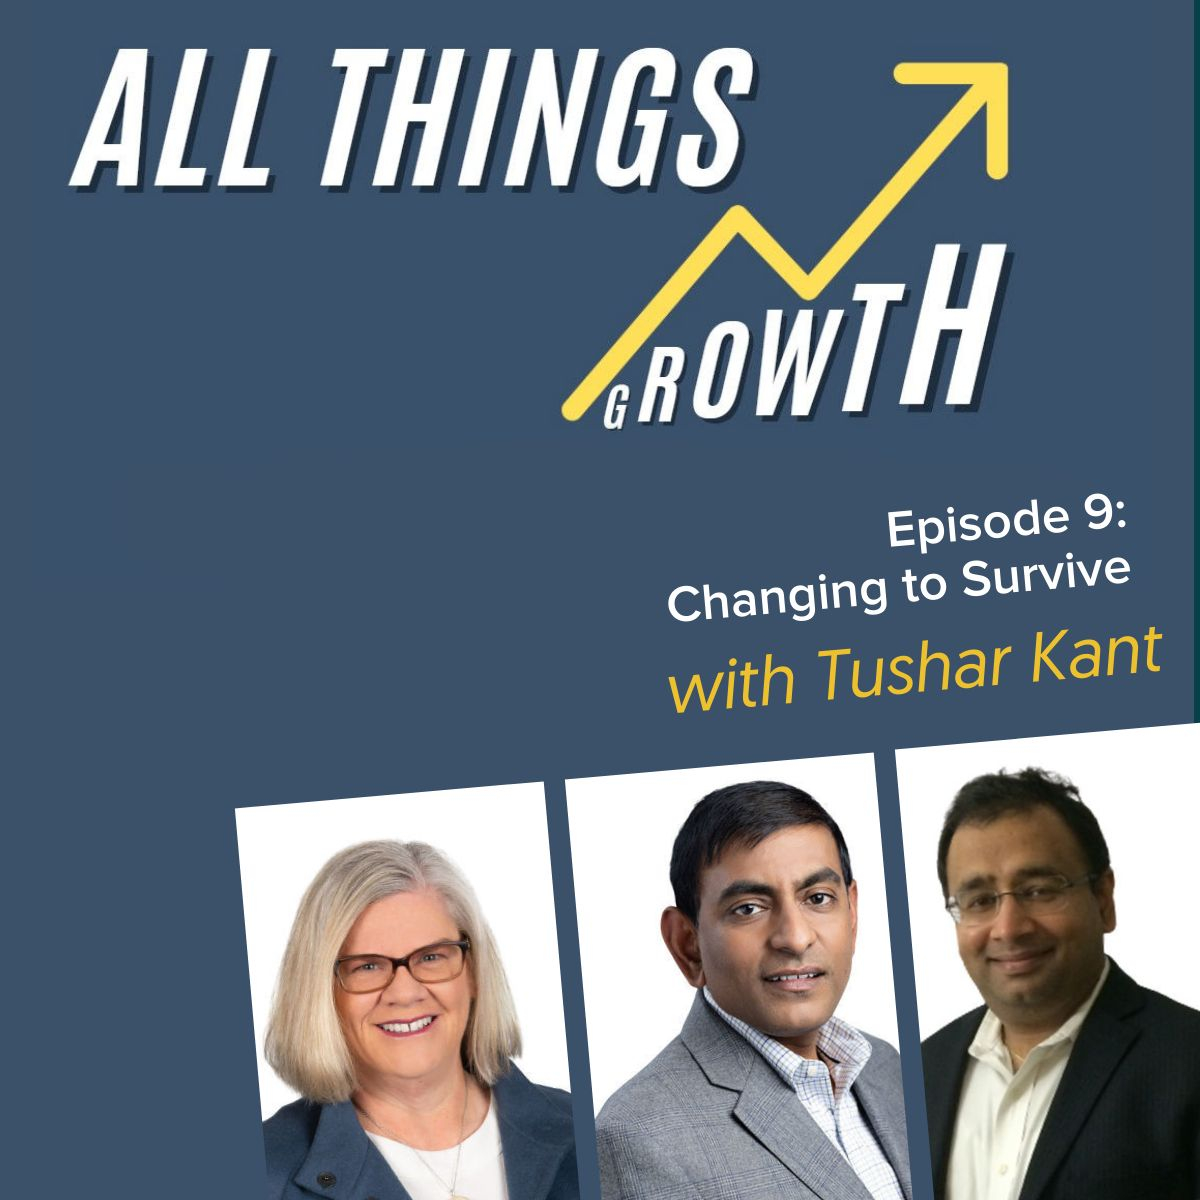 Episode 9: Changing to Survive with Tushar Kant